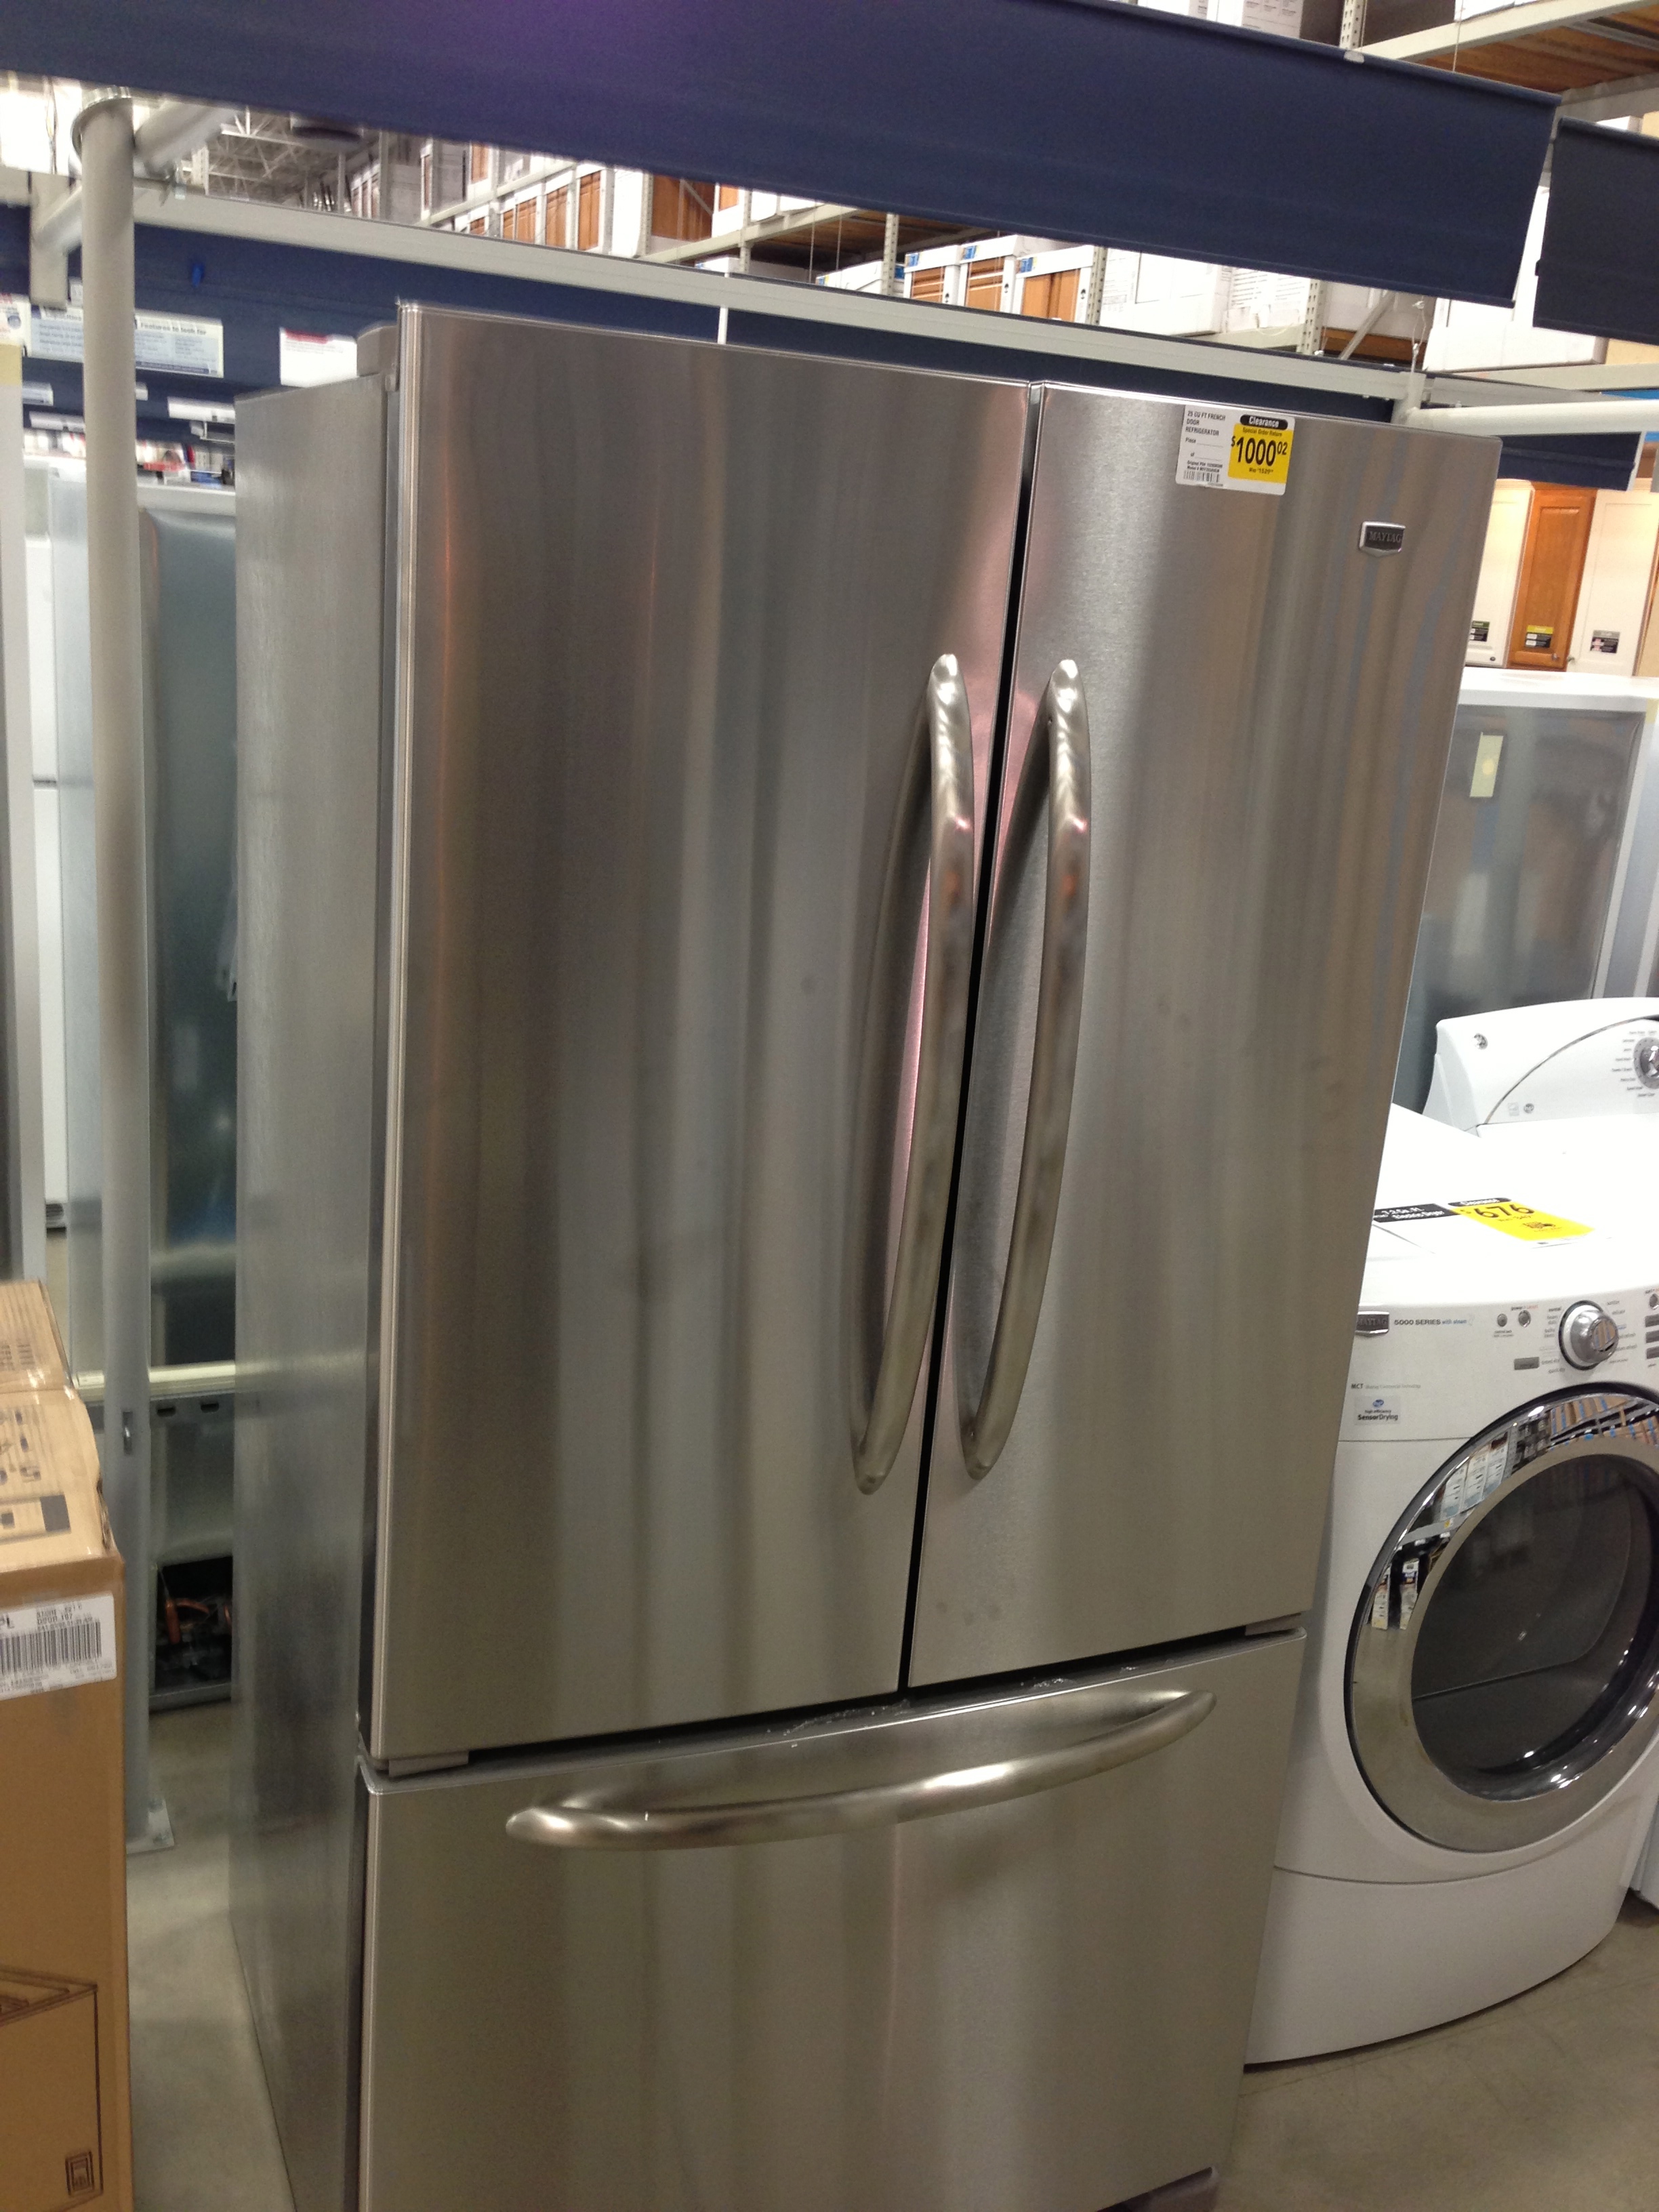 Here is the refrigerator sitting over at Lowes.  They are delivering it on Sunday, which seems weird.